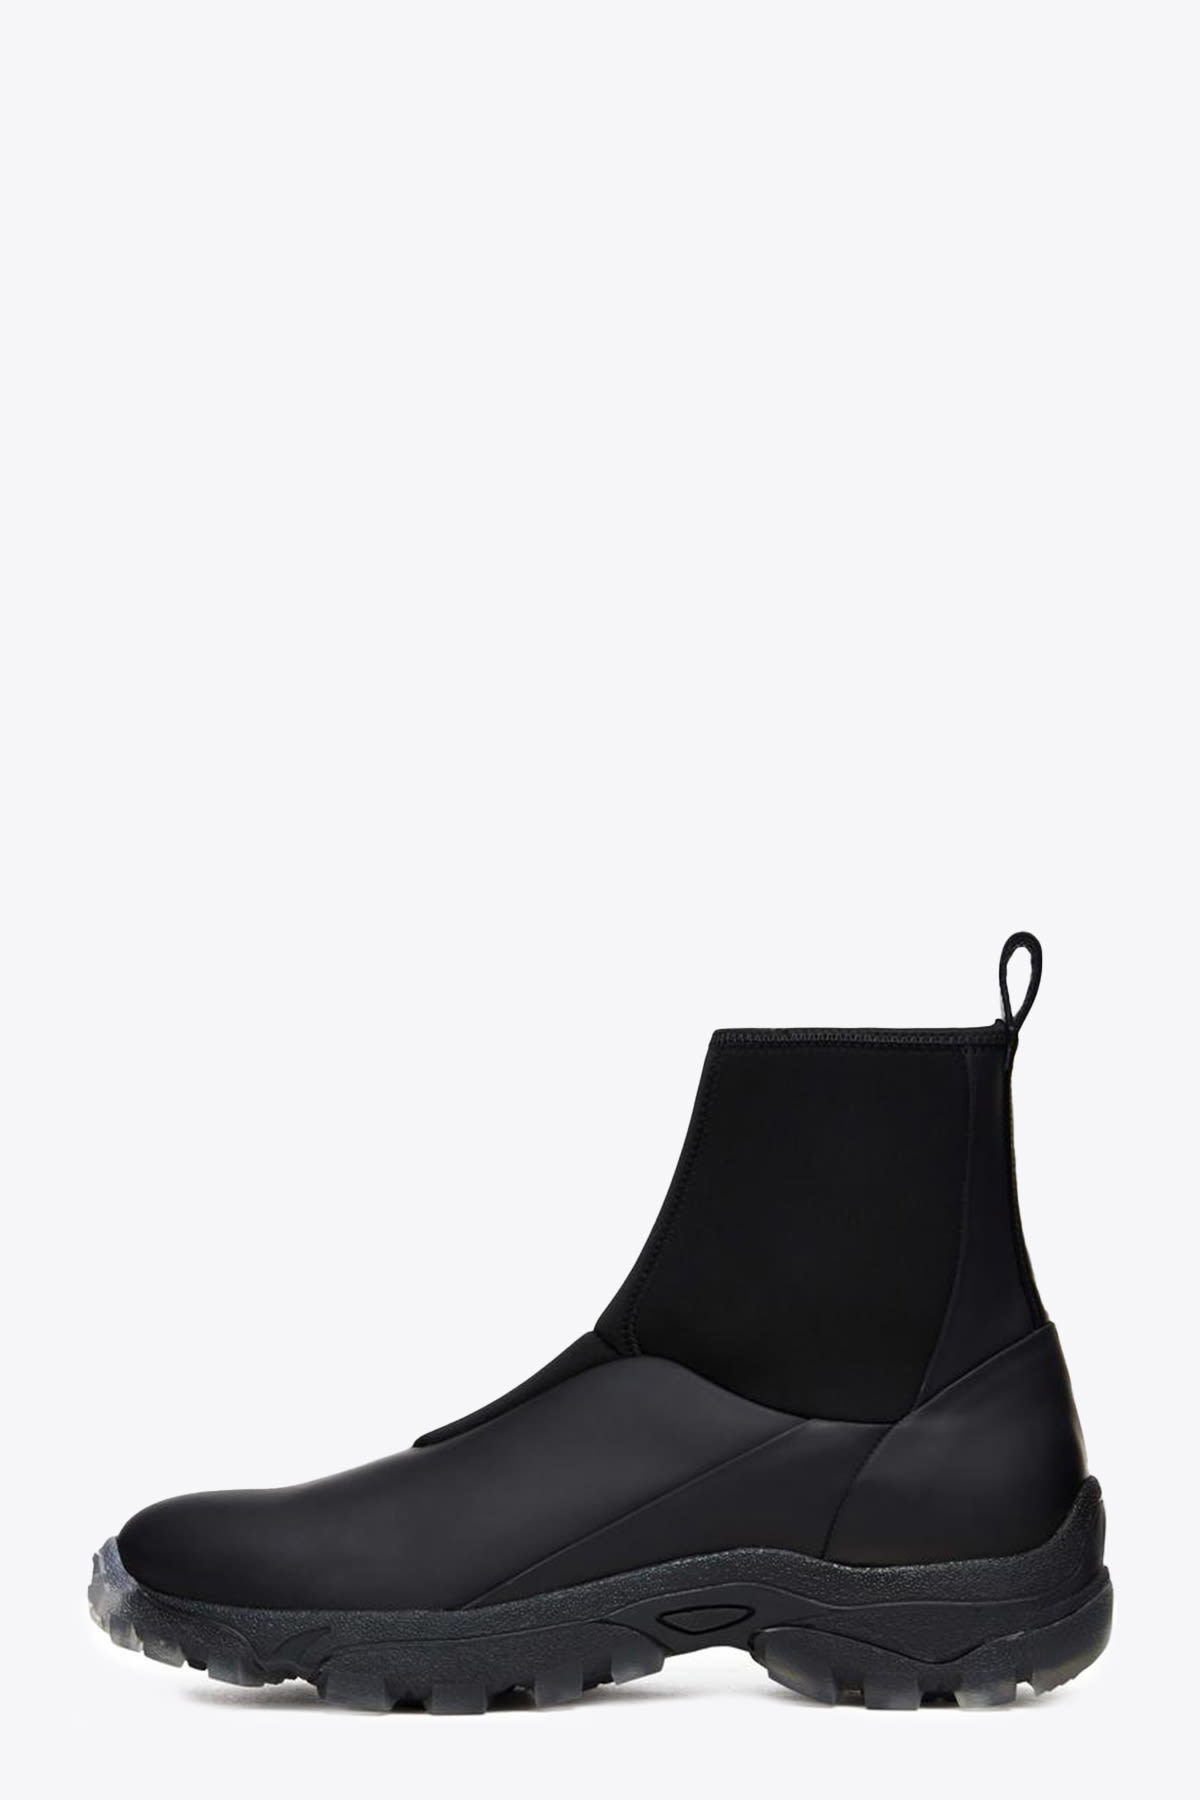 A-COLD-WALL Nc.2 High Black leather ankle boot with logo